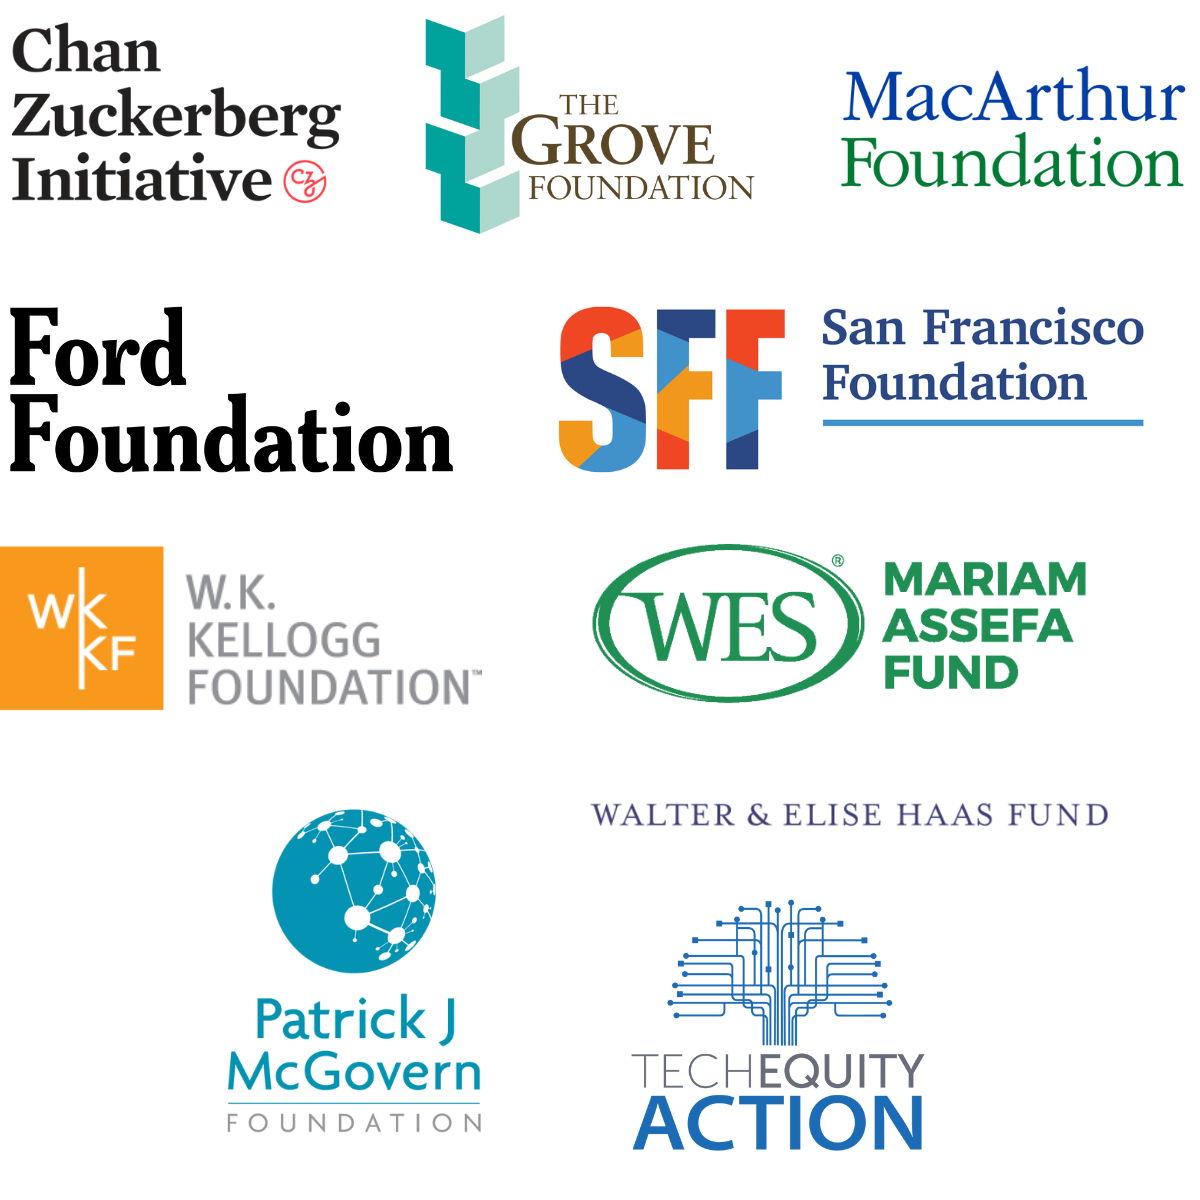 Our major funders